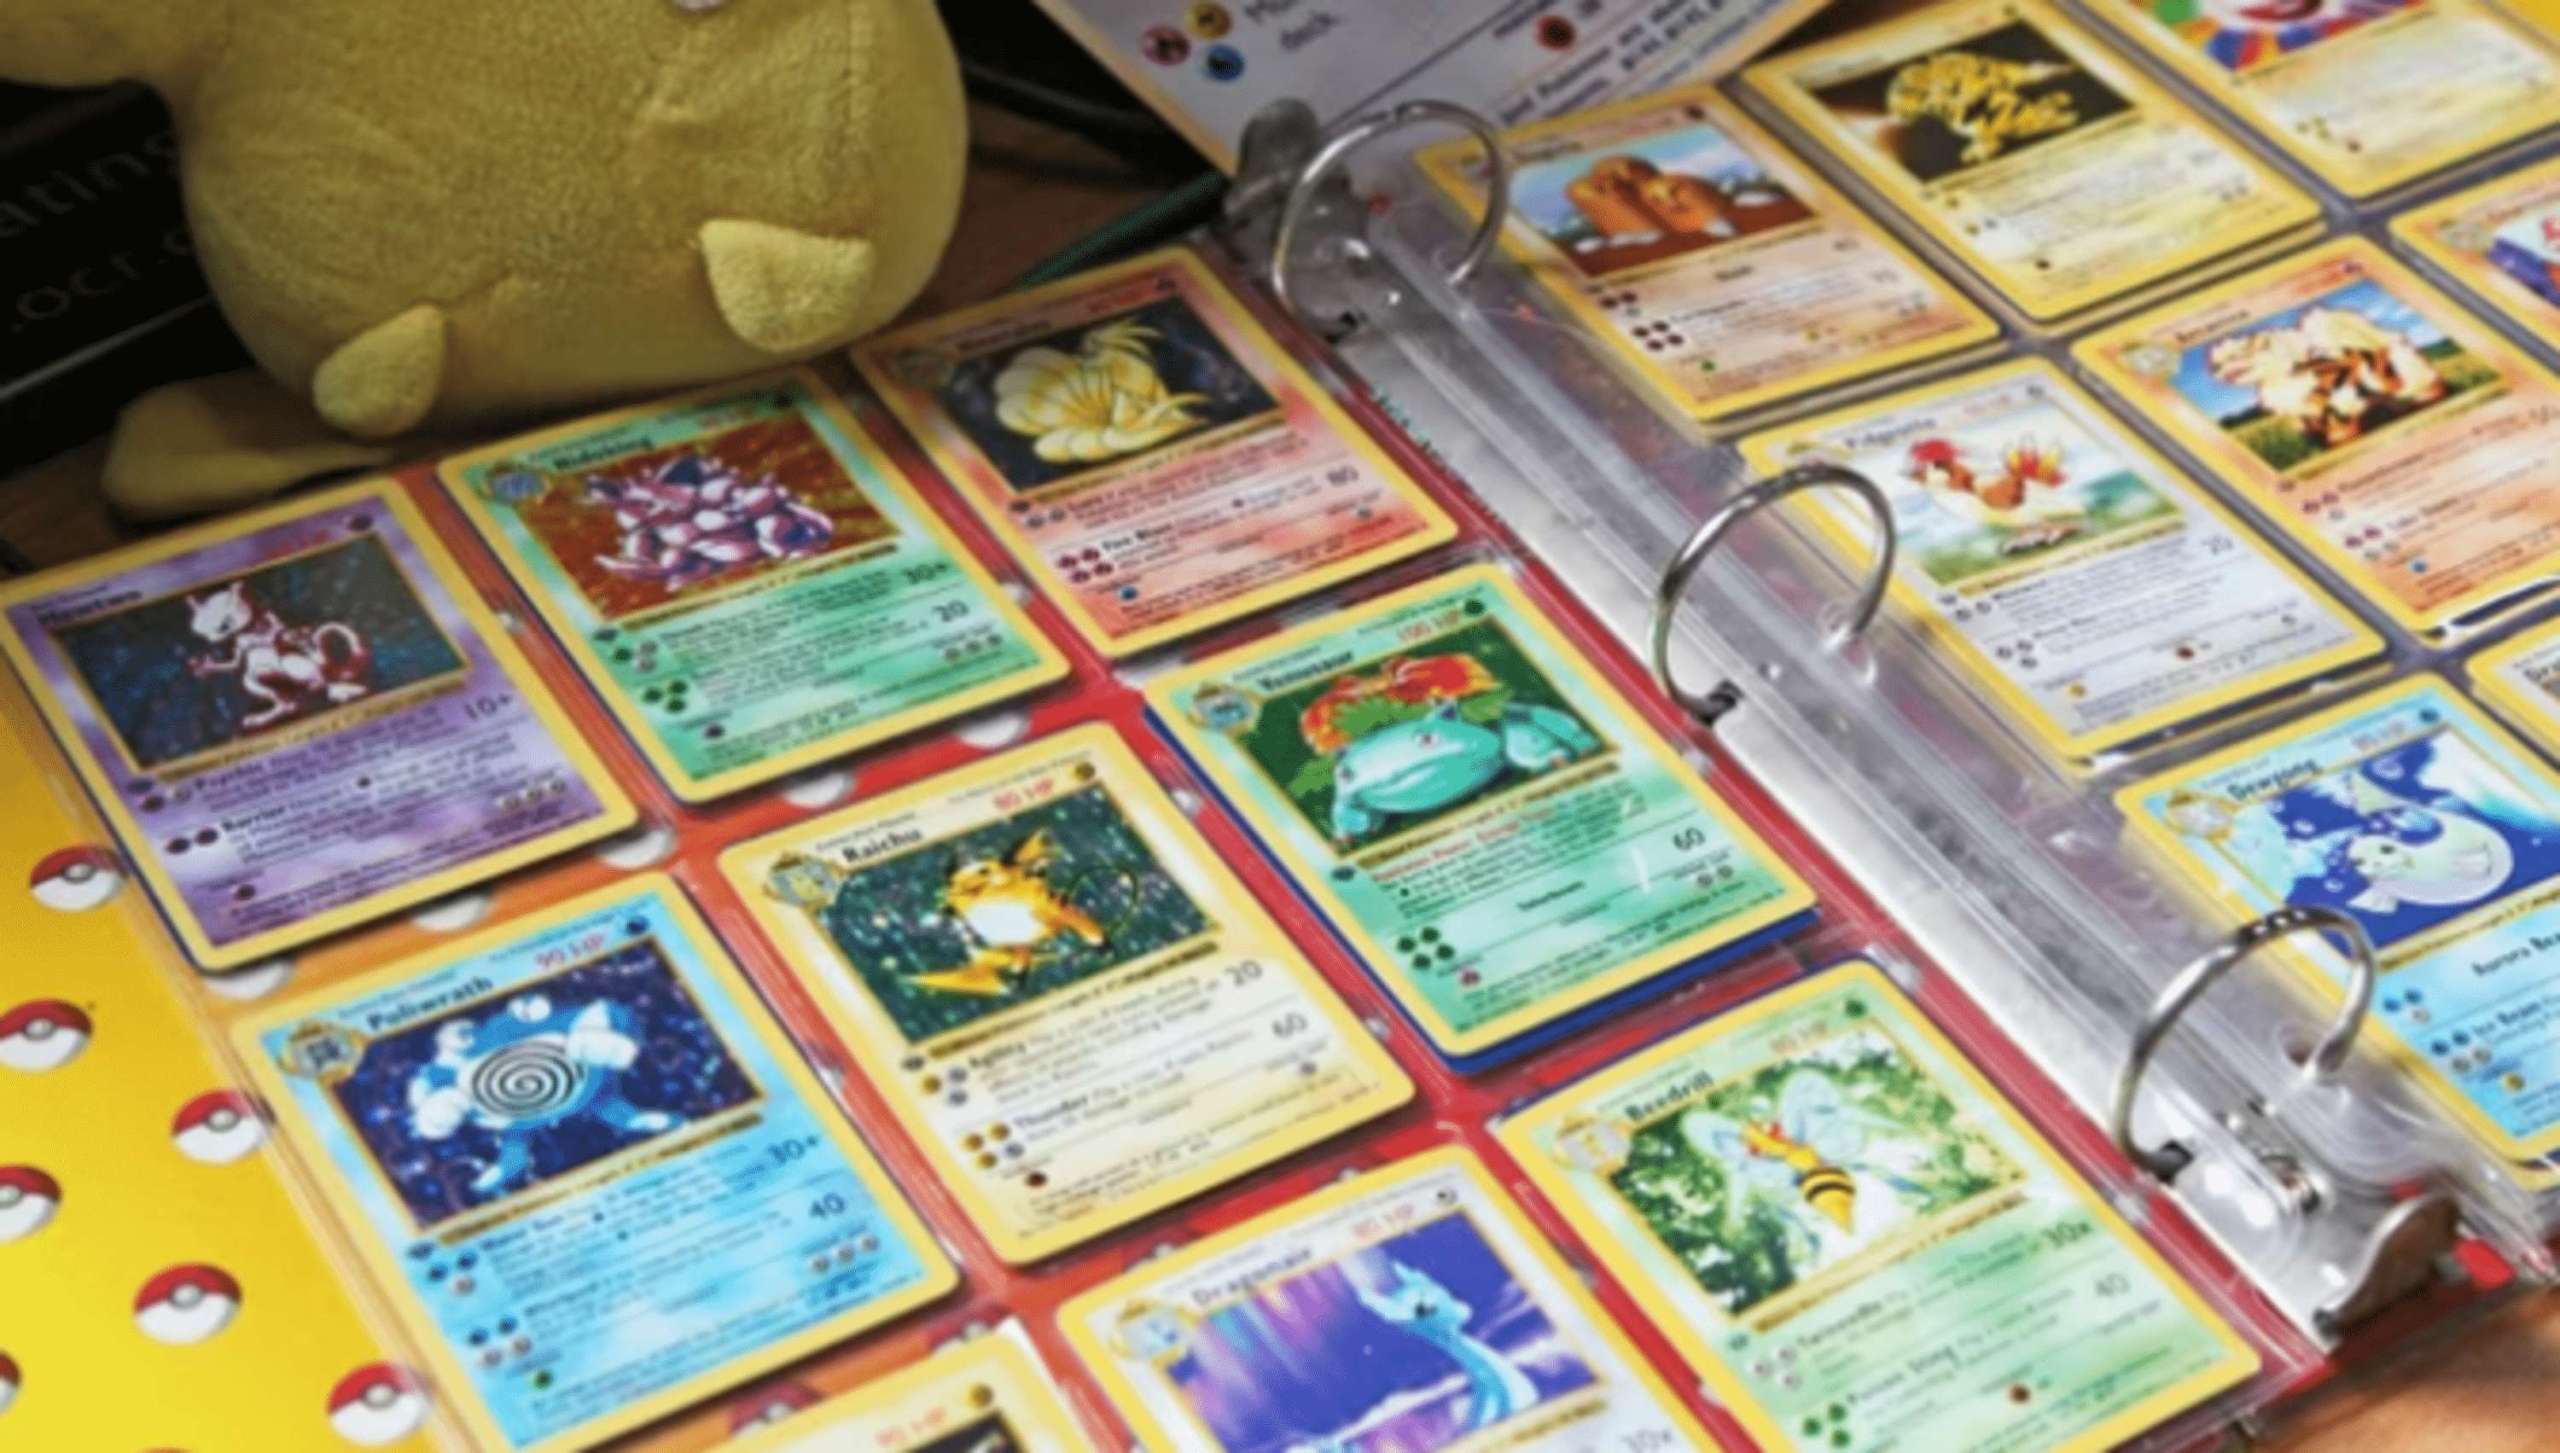 A $70,000 Value Of Stolen Pokemon Cards Is Hidden By A Thief At Their Mother’s House